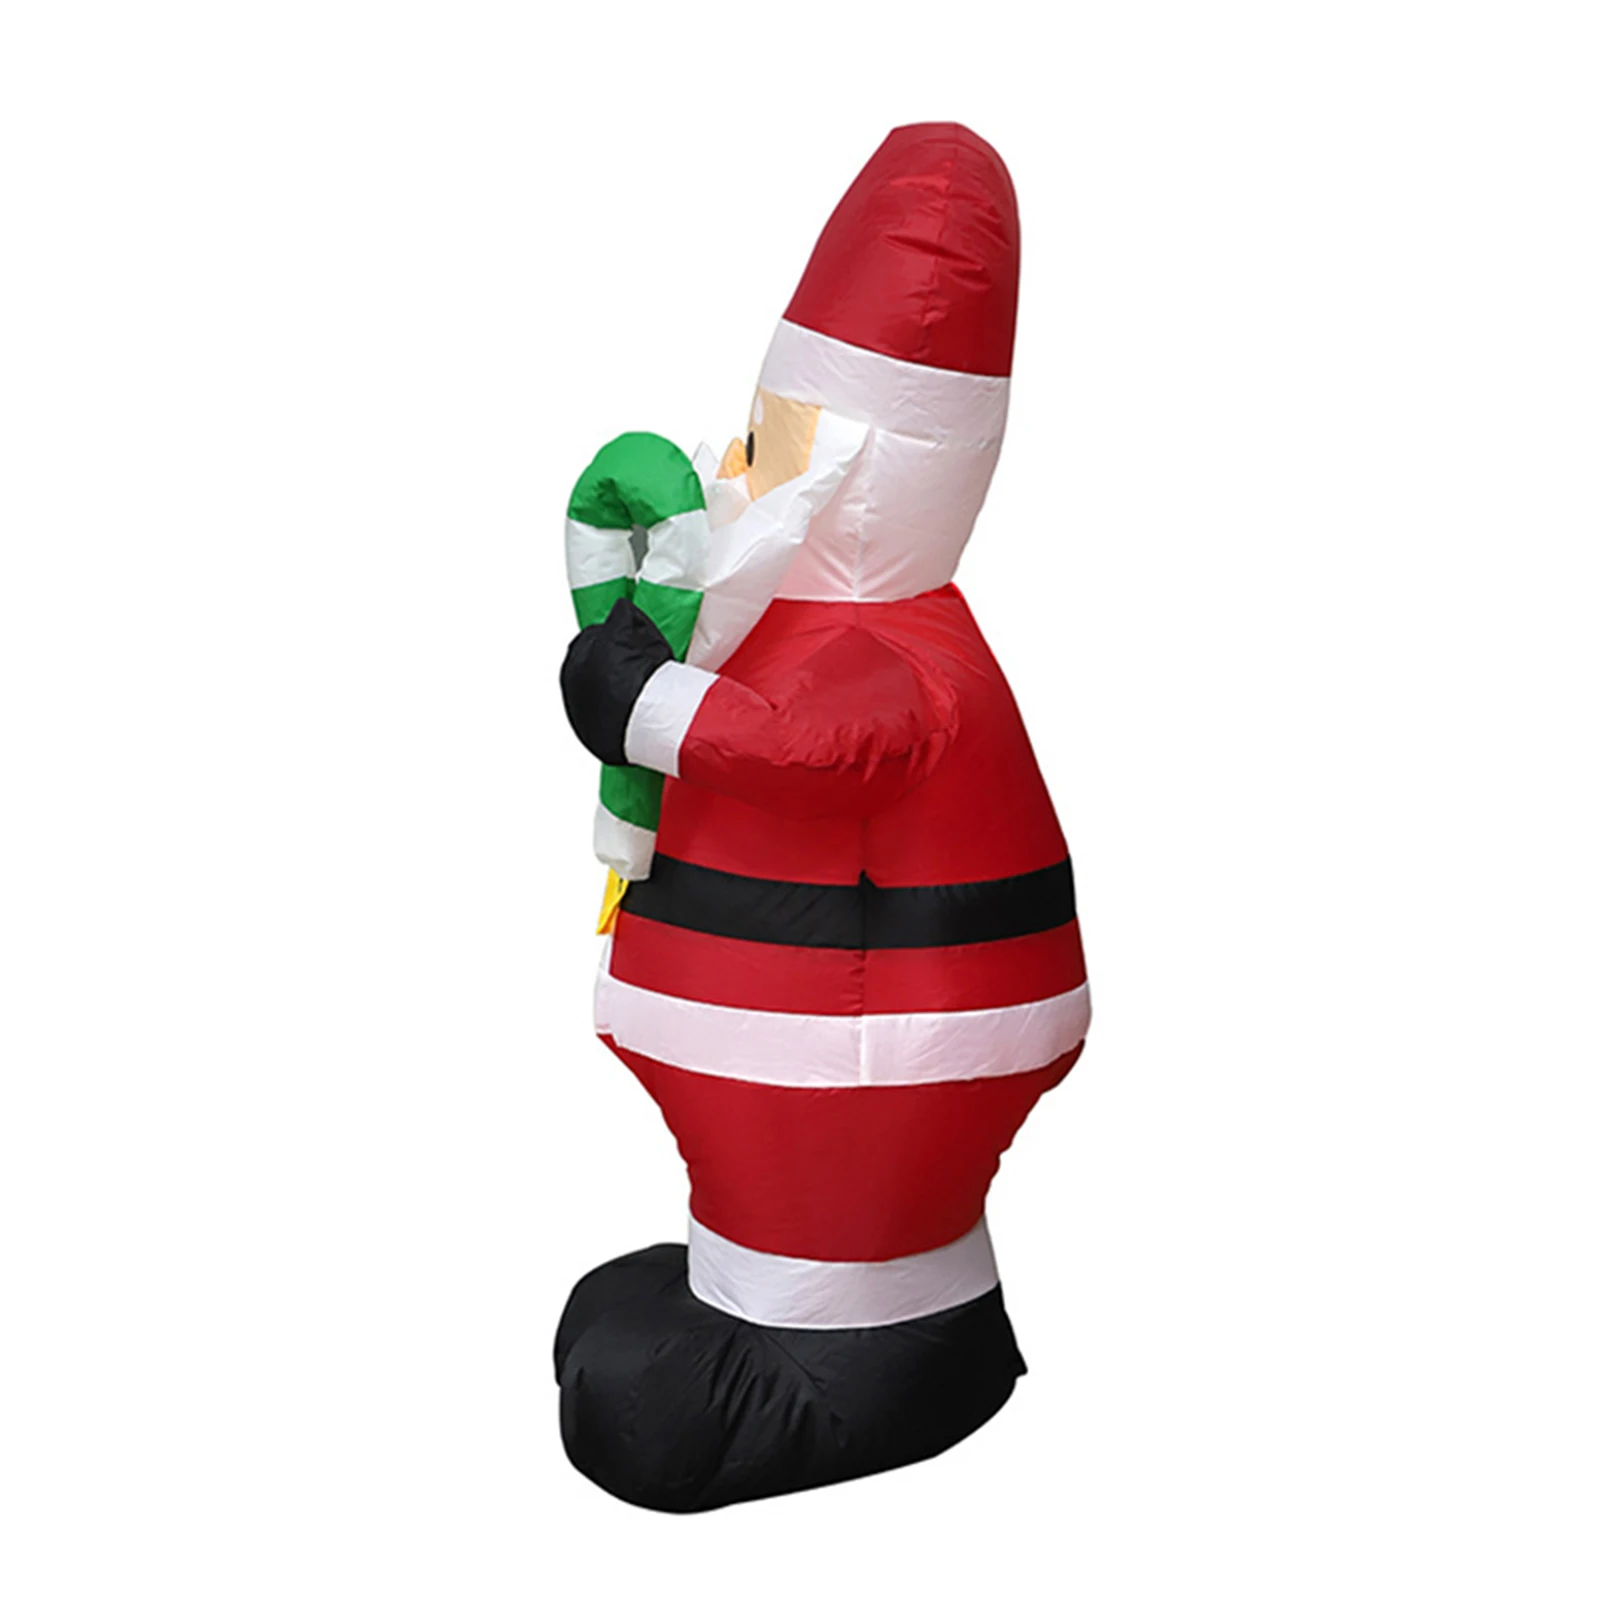 

Inflatable Christmas Outdoor Lighted Yard Decoration Santa Claus With Candy Cane 1.2m Tall